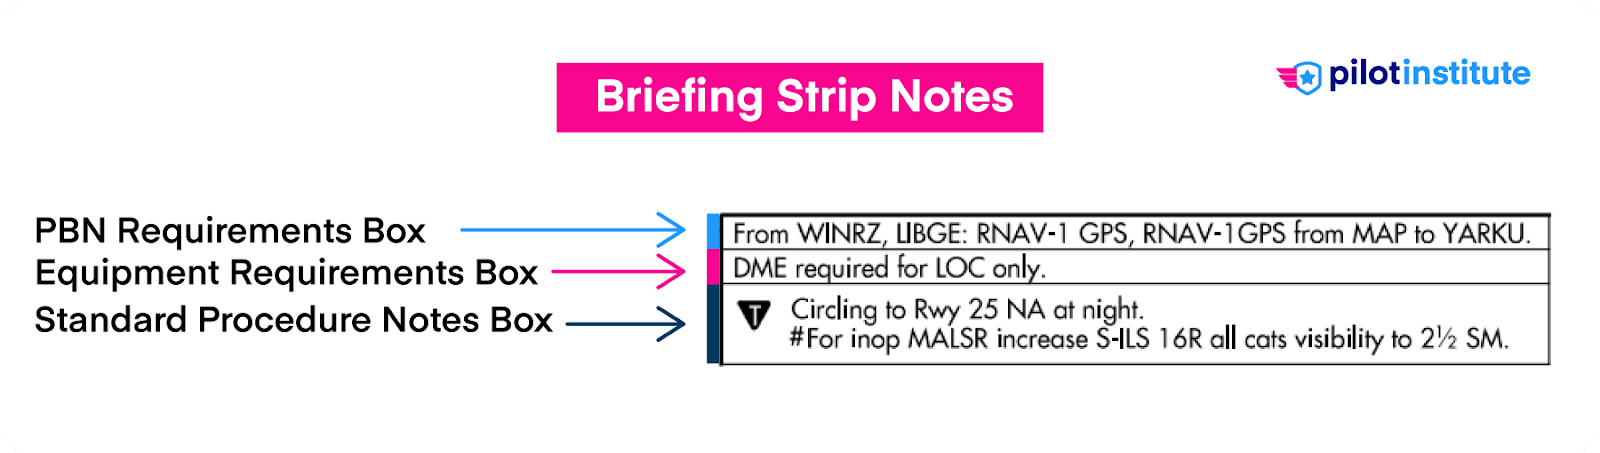 FAA chart briefing strip notes.